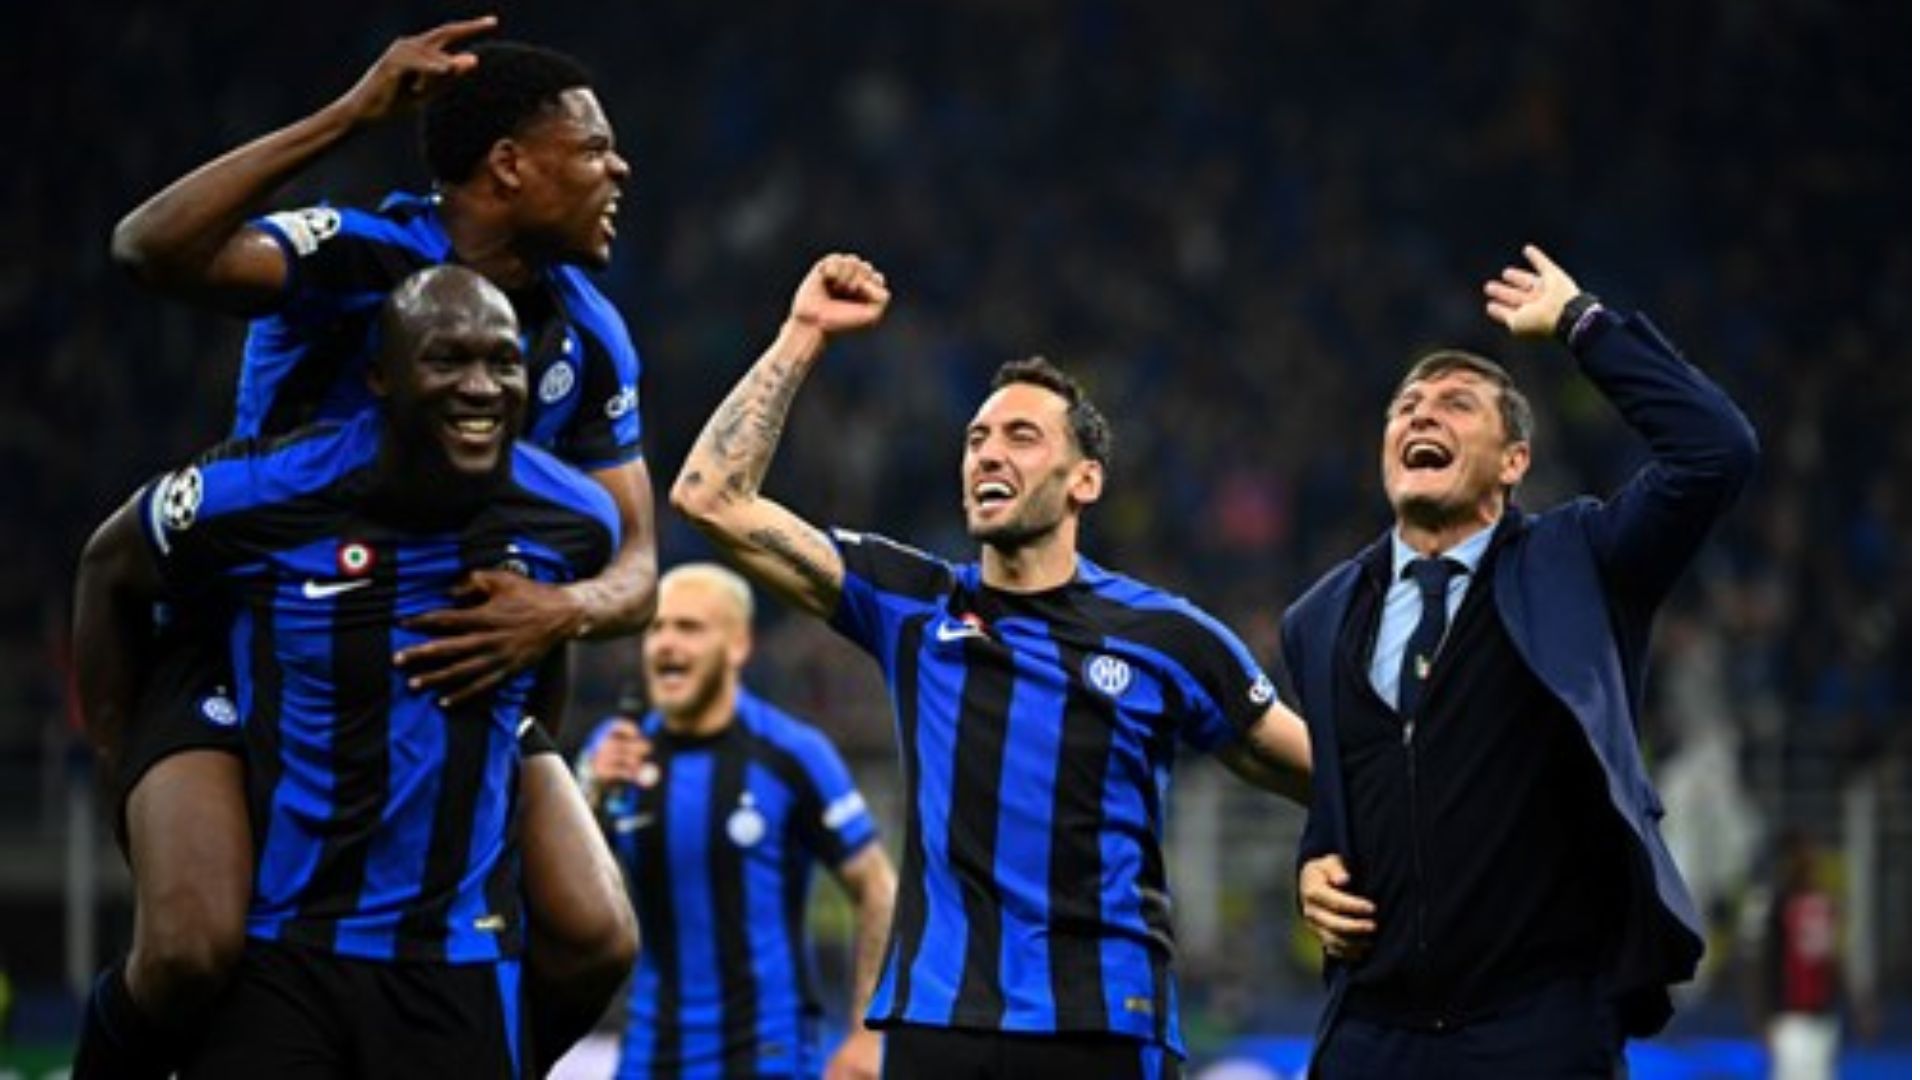 Inter Milan star says Manchester United association gives him ‘extra inspiration to win UCL final